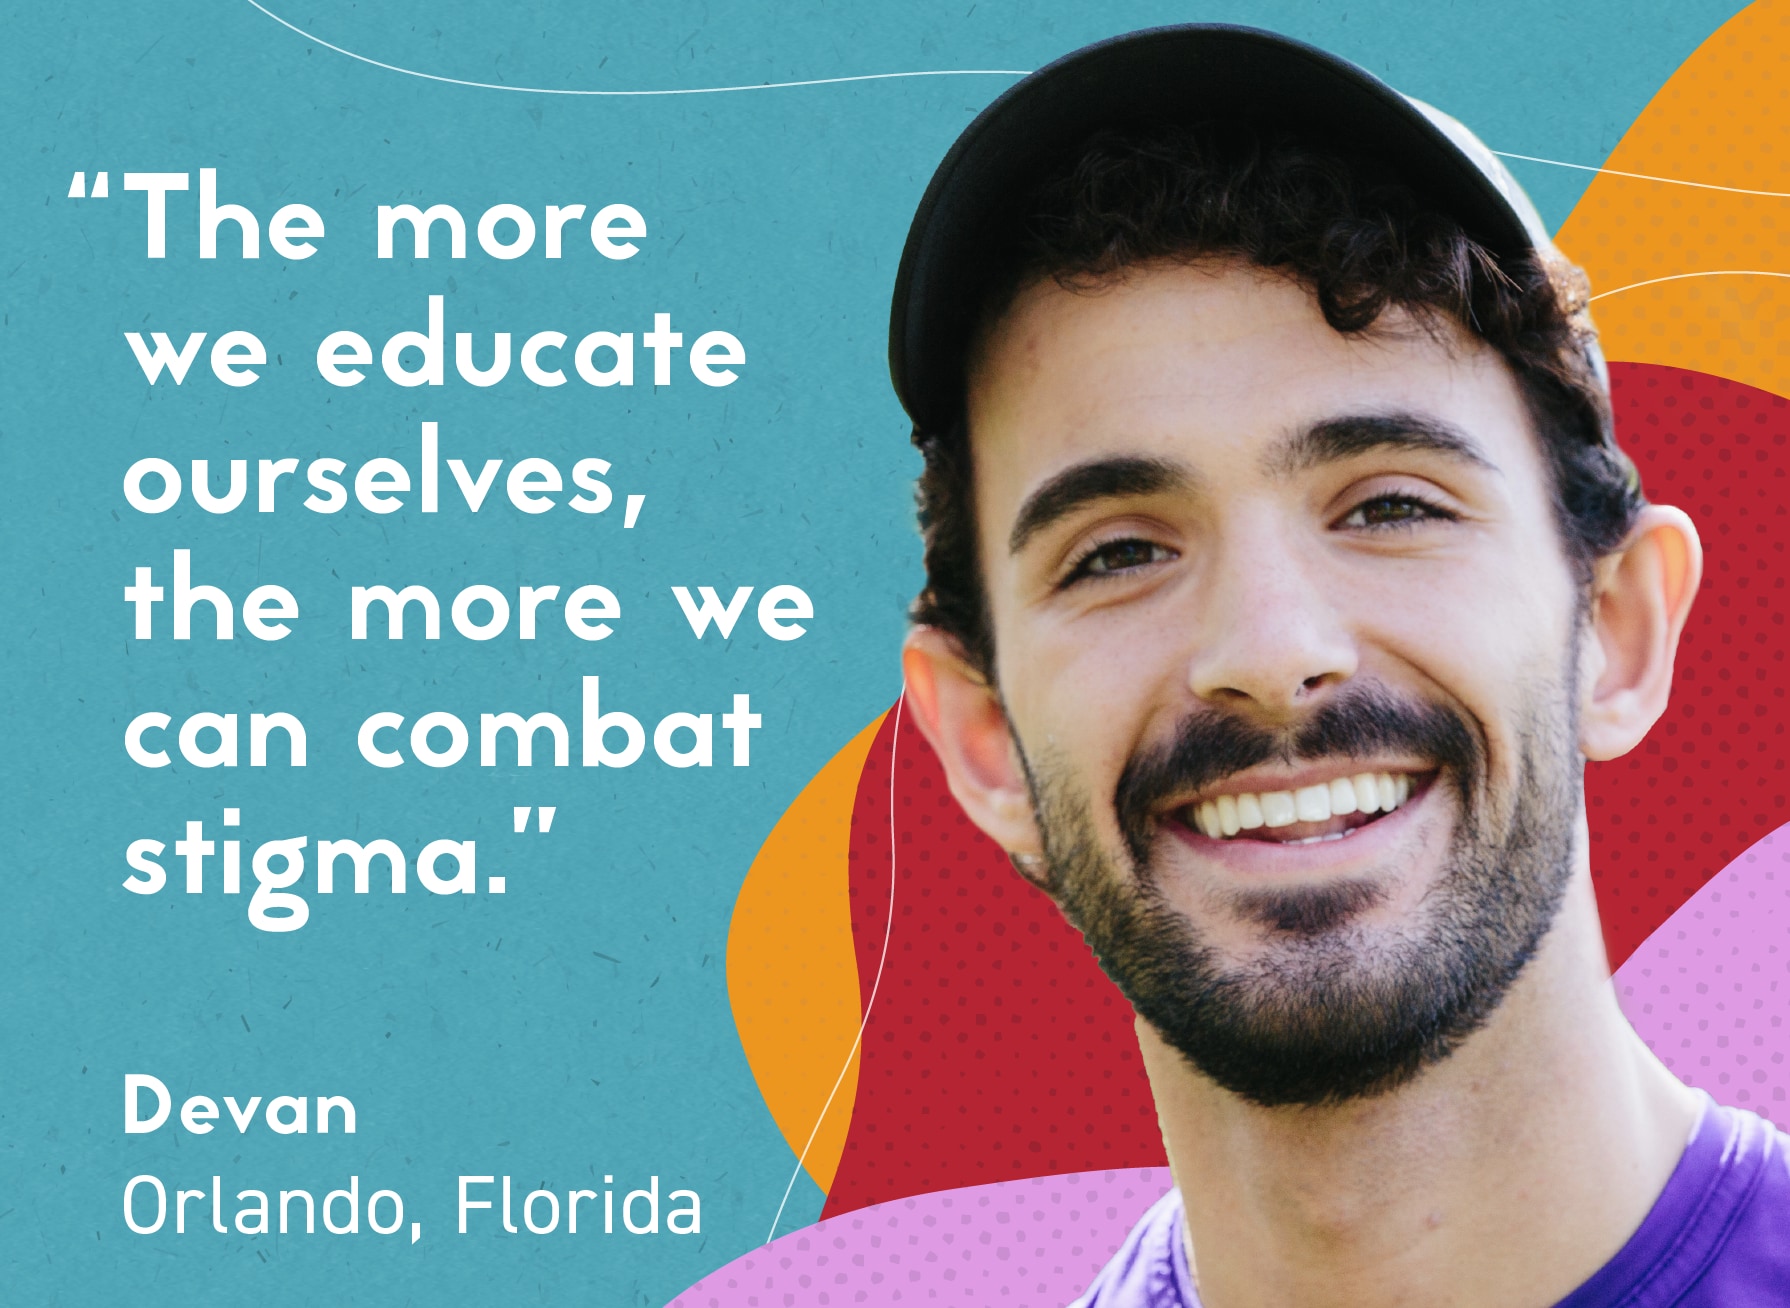 Man pictured smiling against a multicolored background. Text: “The more we educate ourselves, the more we can combat stigma.” Devan Orlando, Florida